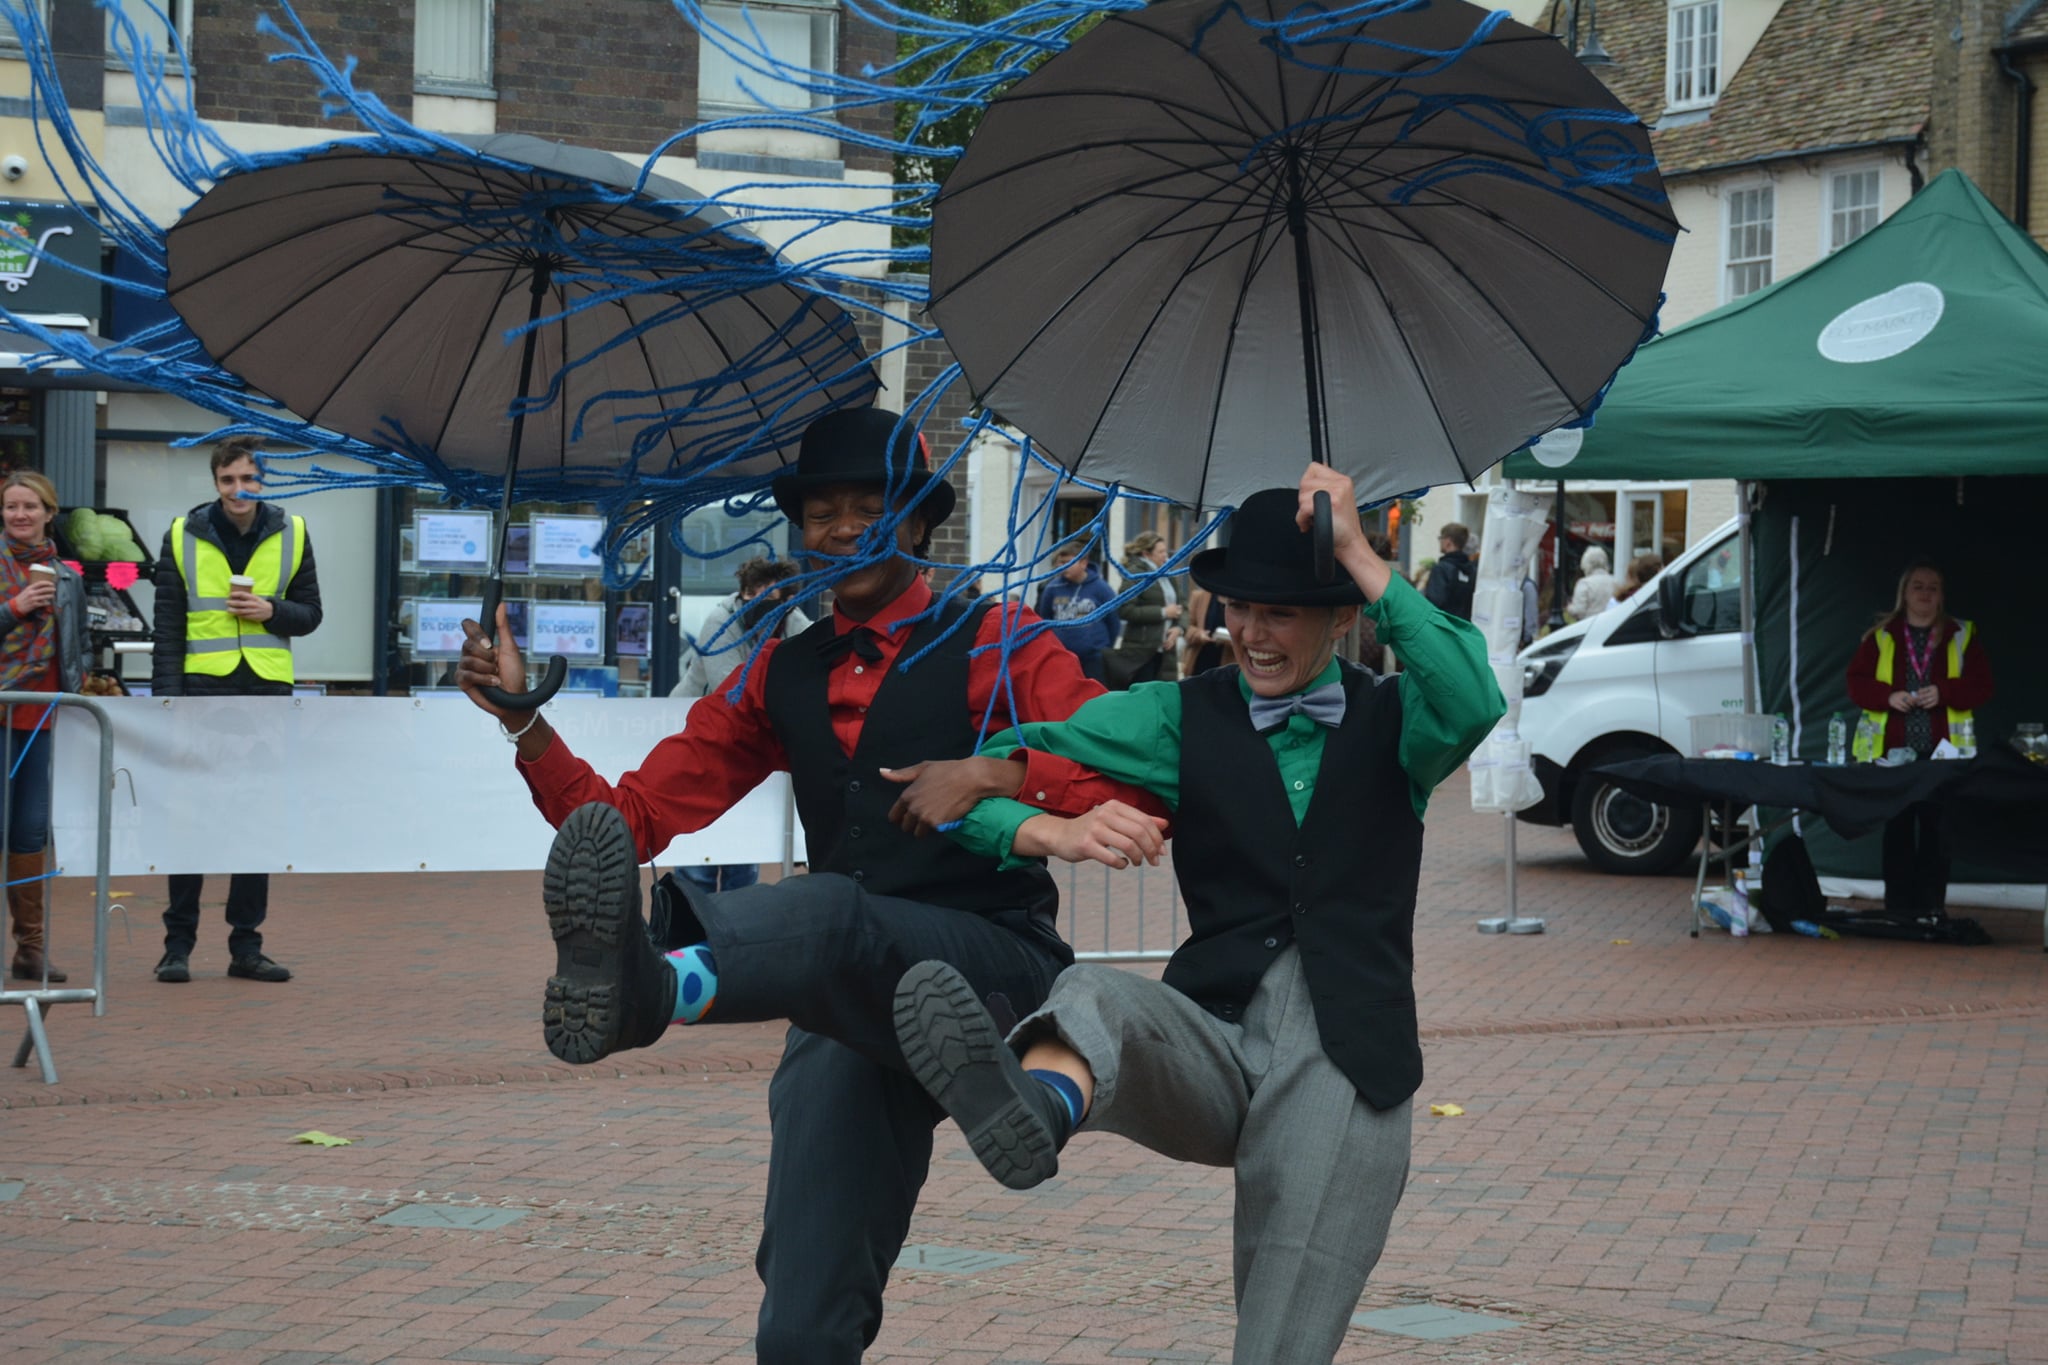 The Weather Machine dance performance at Ely Markets